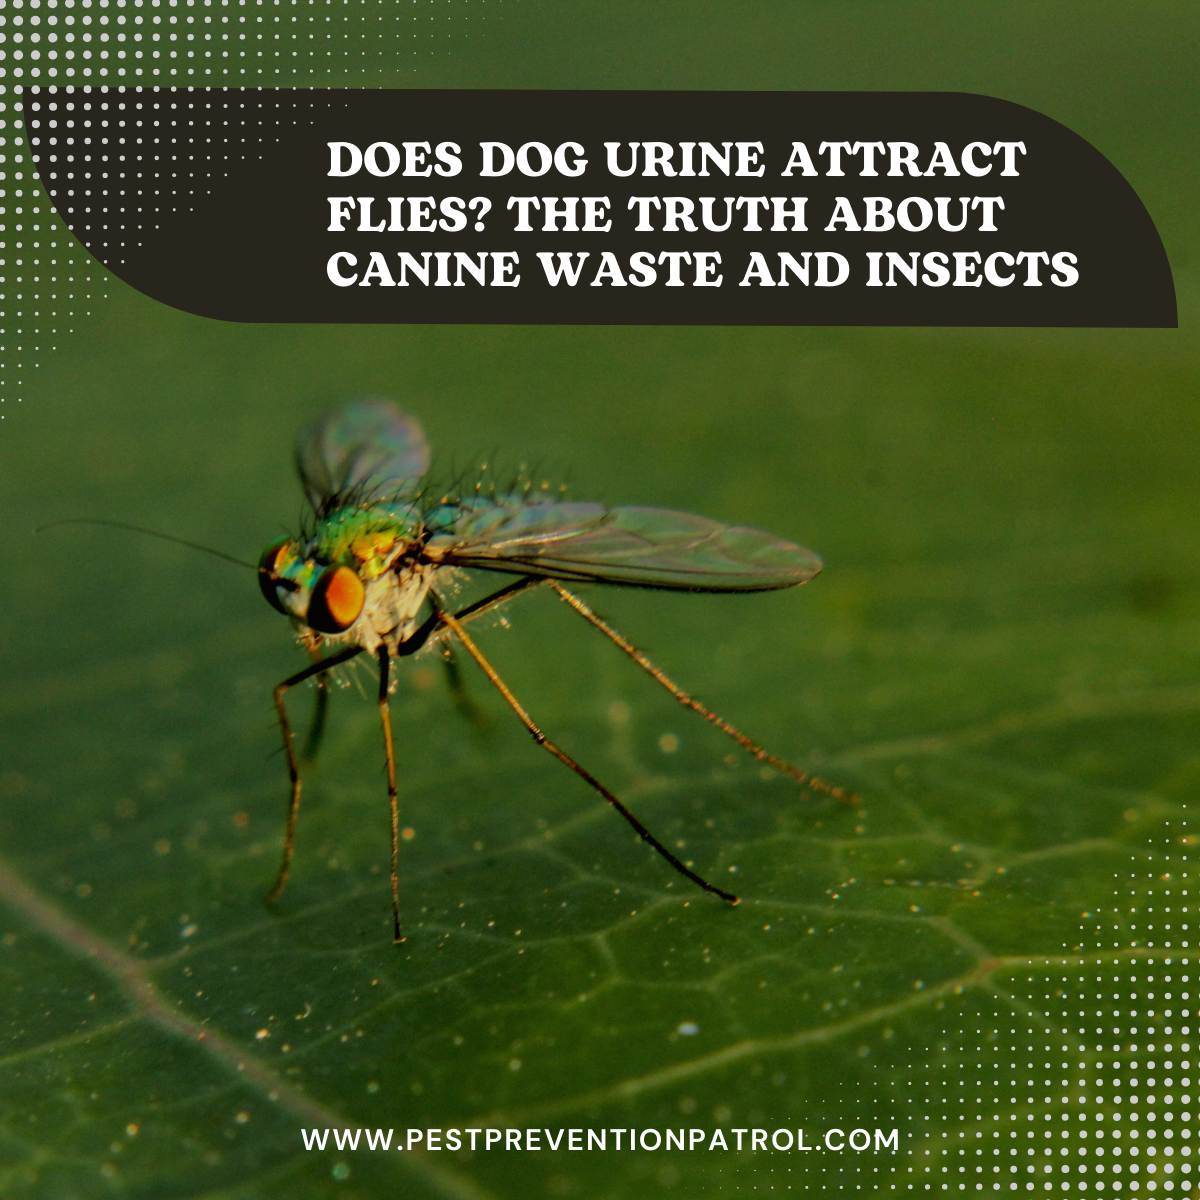 Does Dog Urine Attract Flies_ The Truth About Canine Waste and Insects